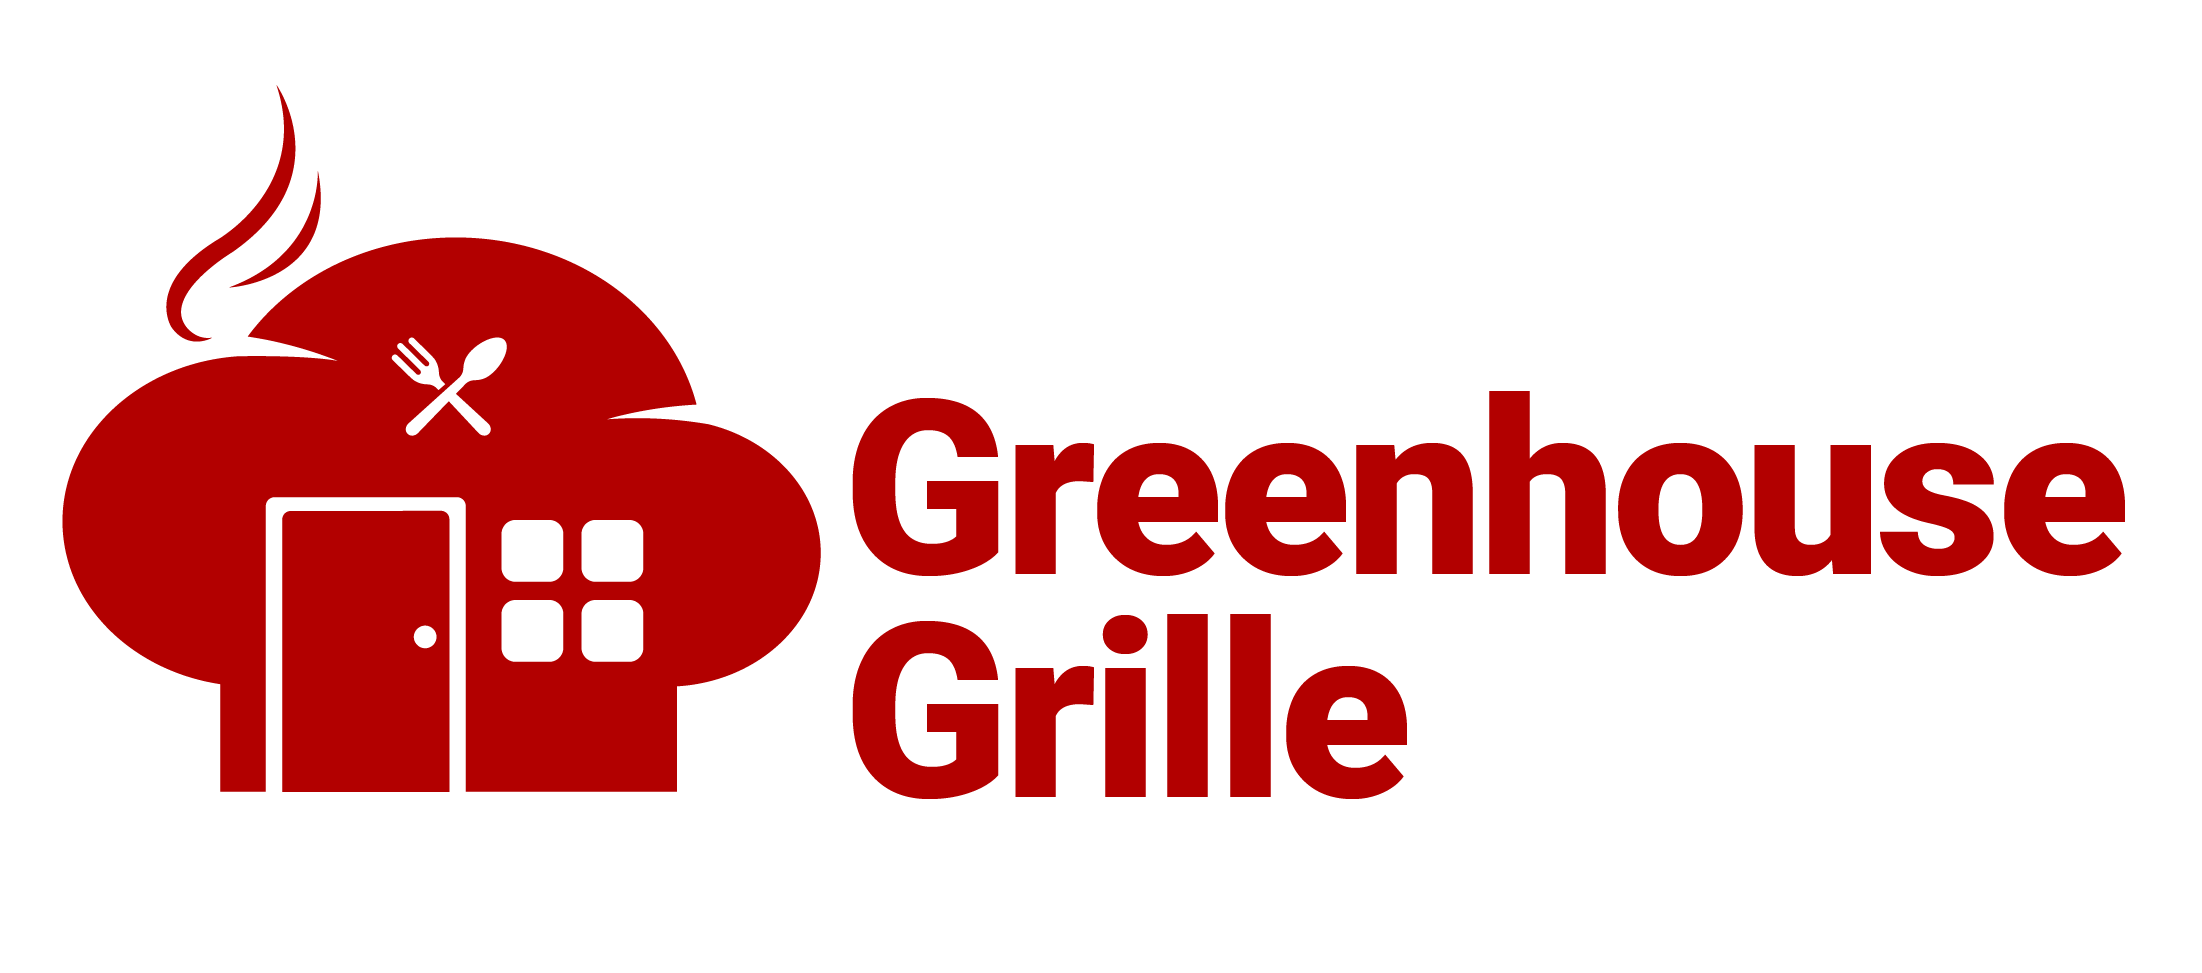 Greenhouse Grille